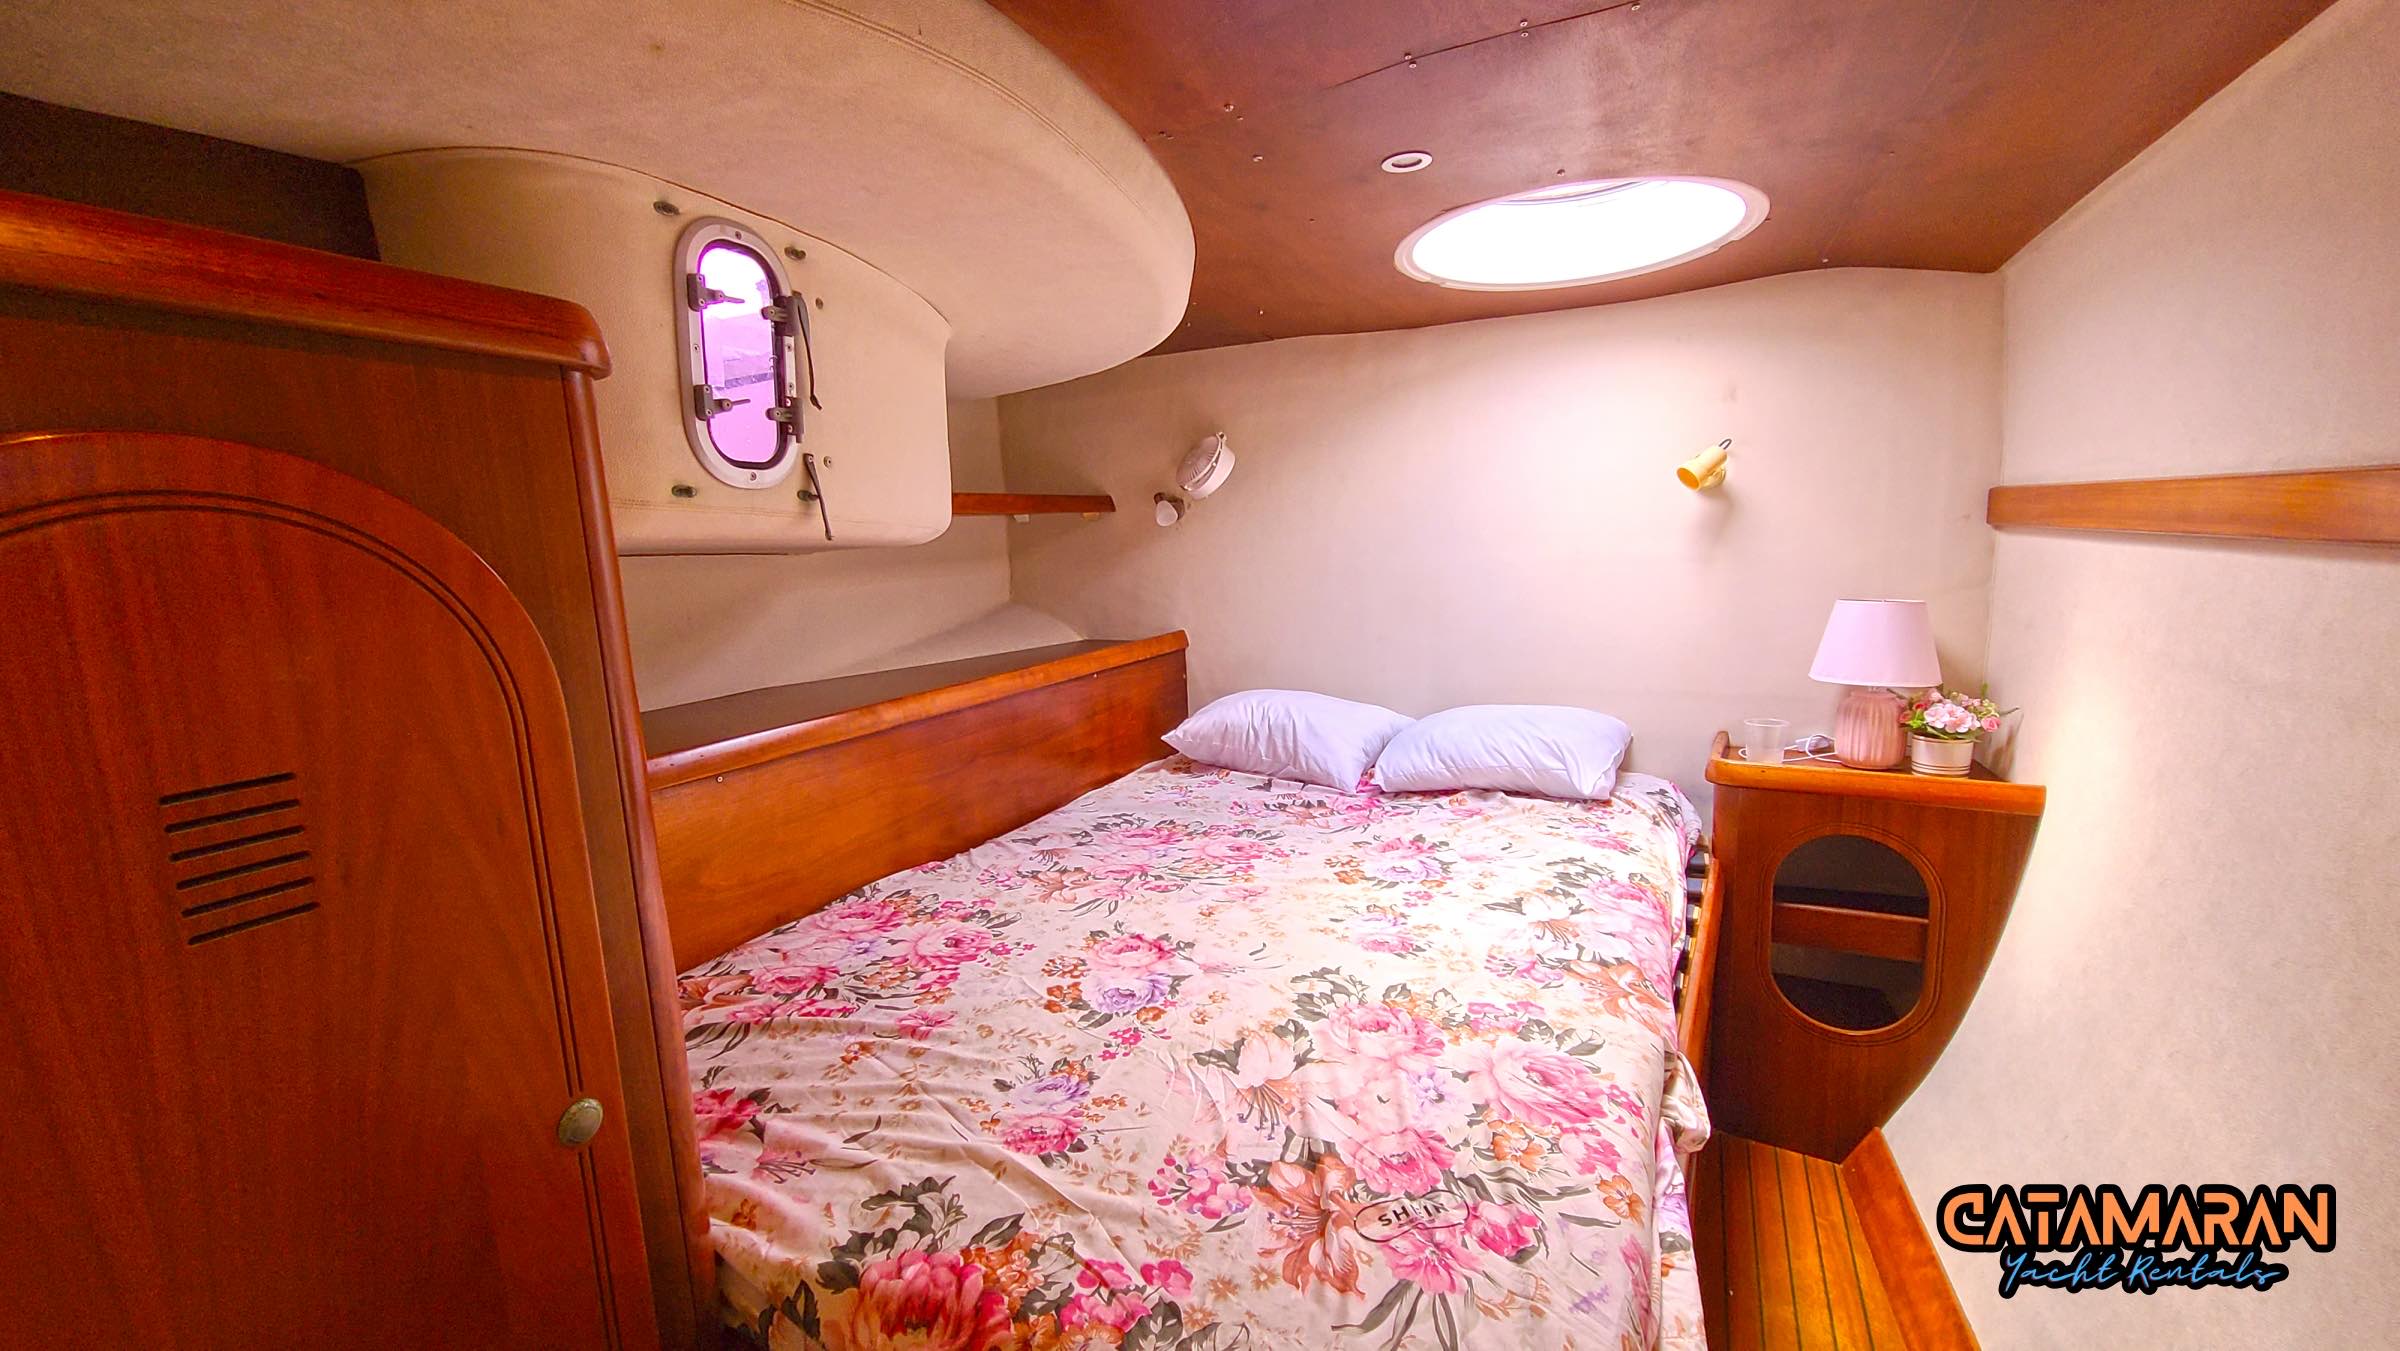 The second room in the catamaran